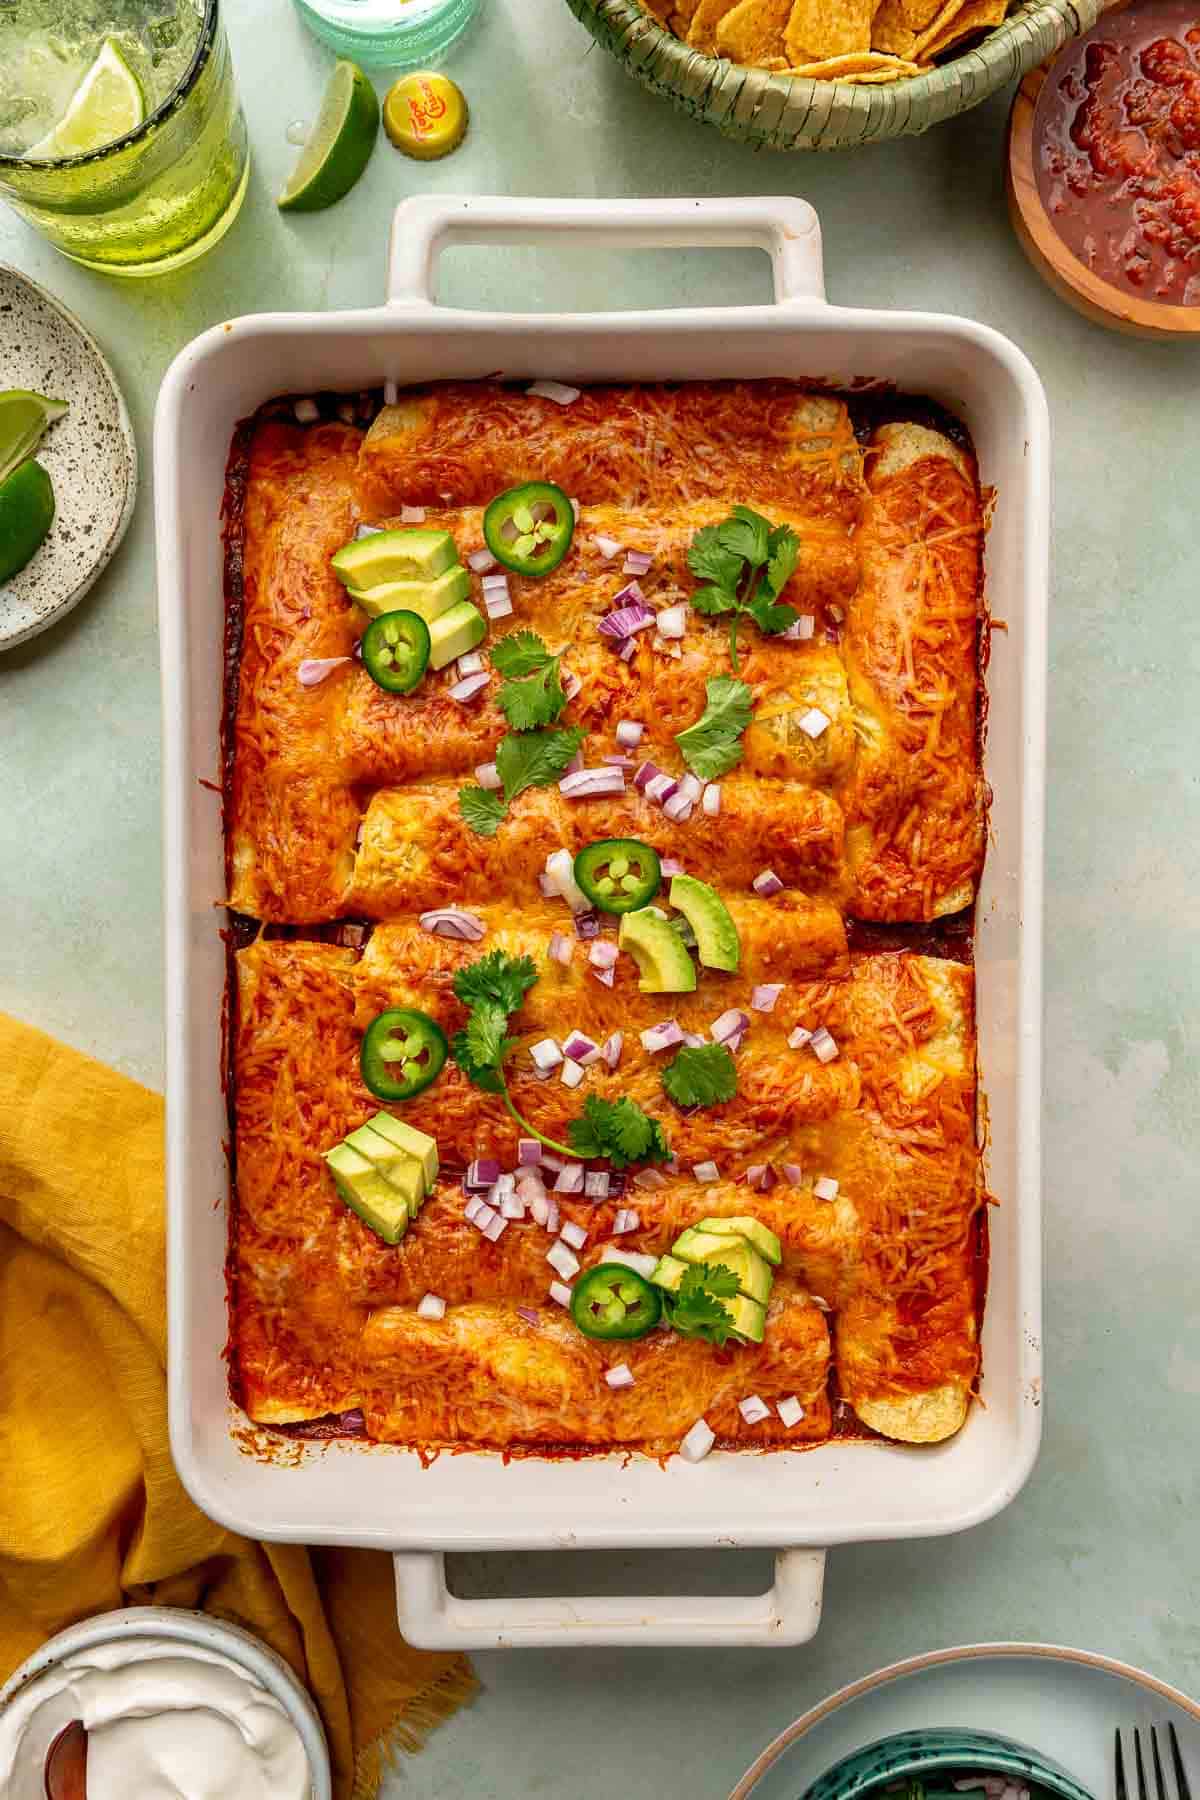 Veggie enchiladas in a white casserole dish topped with jalapeño slices and avocado.